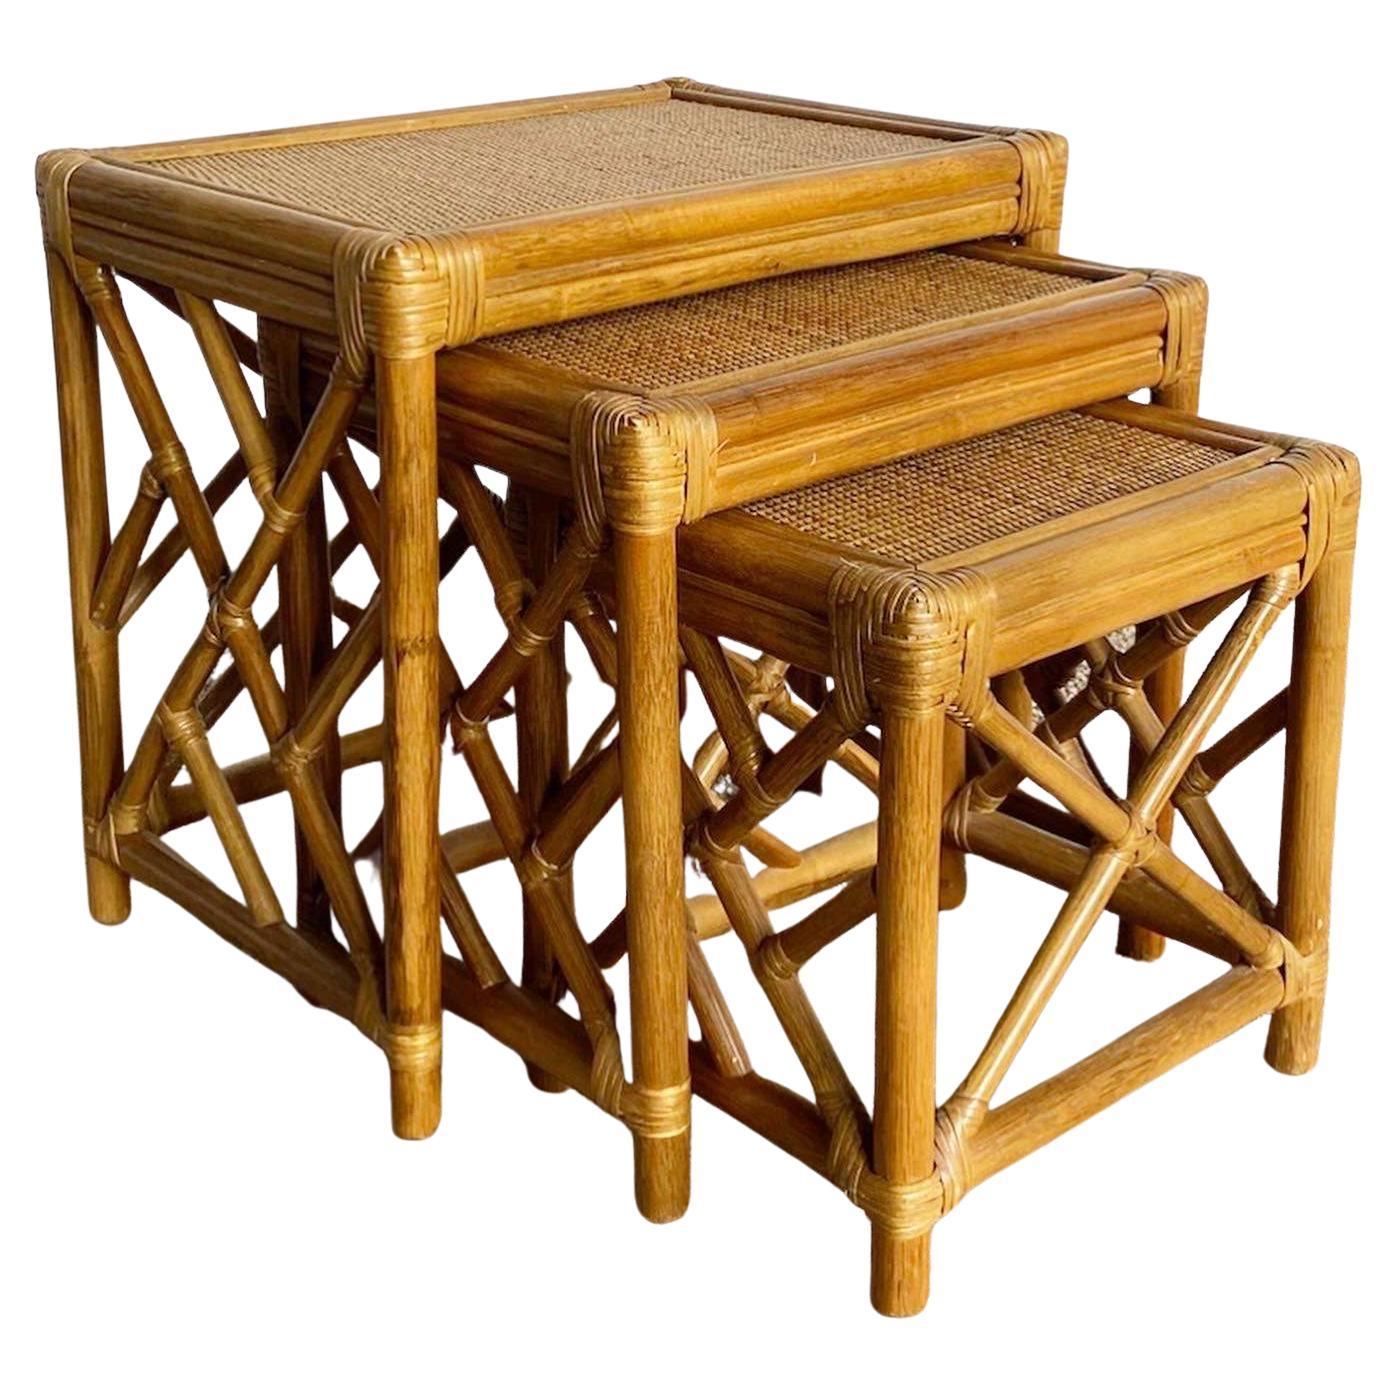 Boho Chic Chippendale Bamboo Rattan and Wicker Nesting Tables - Set of 3